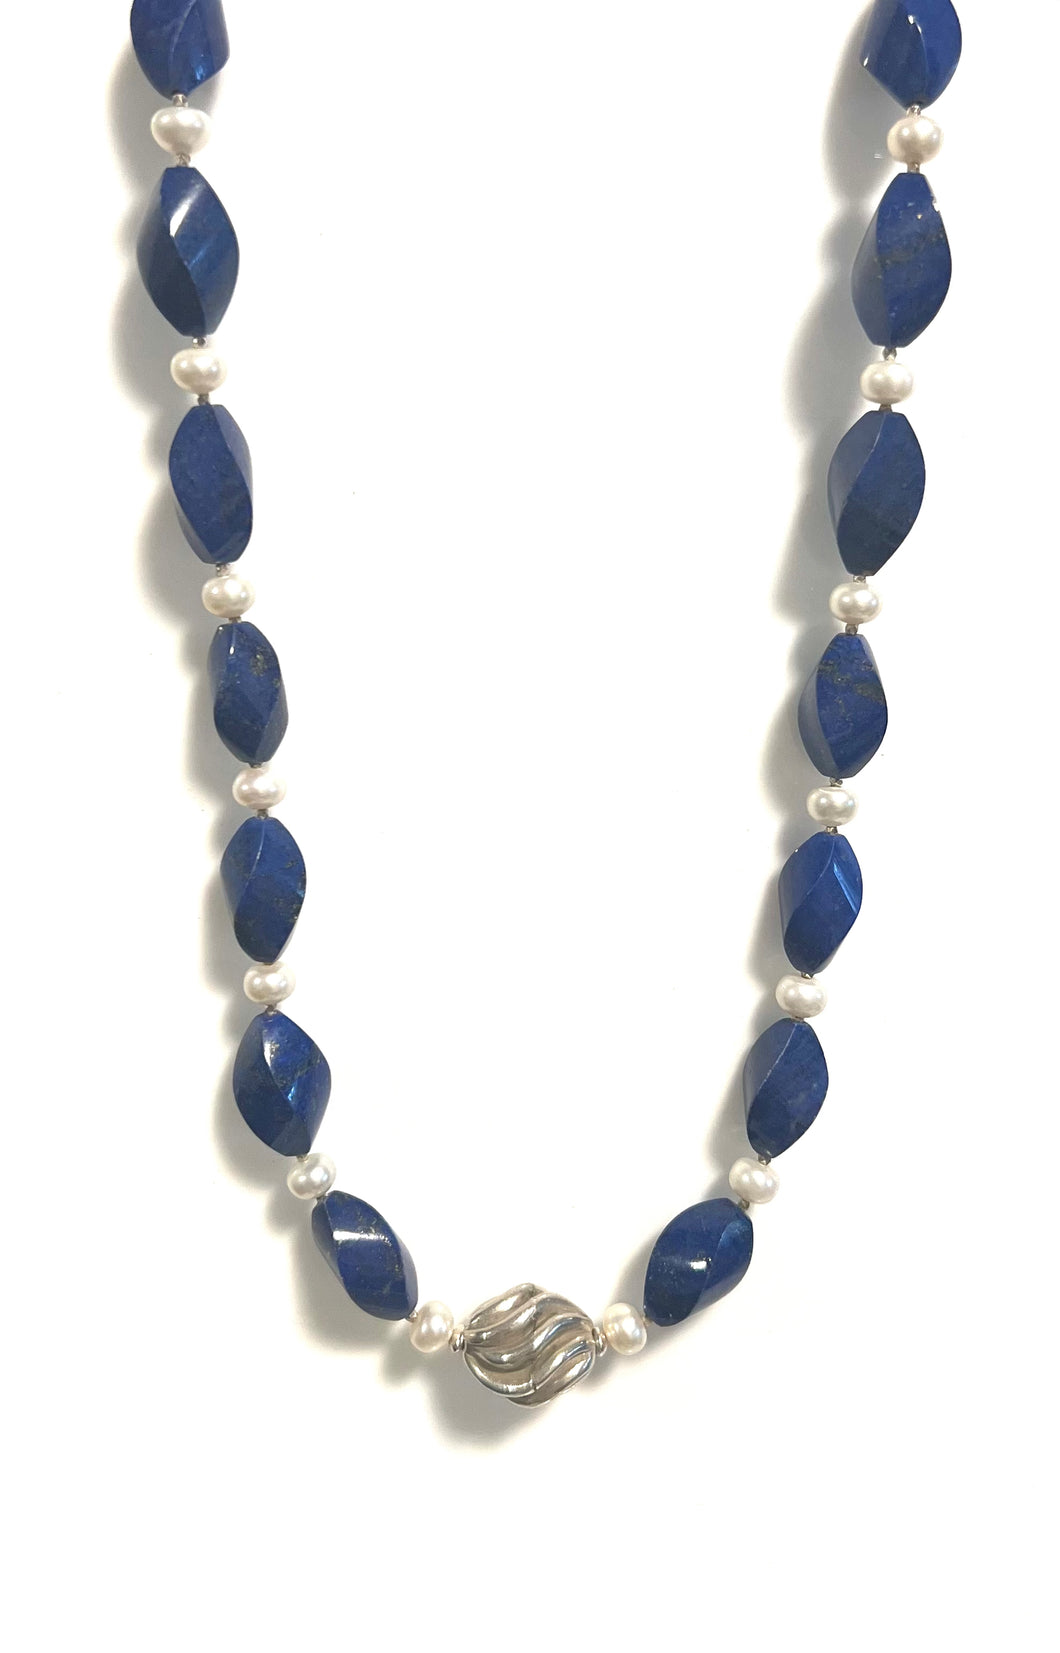 Australian Handmade Blue Necklace with  Lapis Lazuli Pearls and Sterling Silver